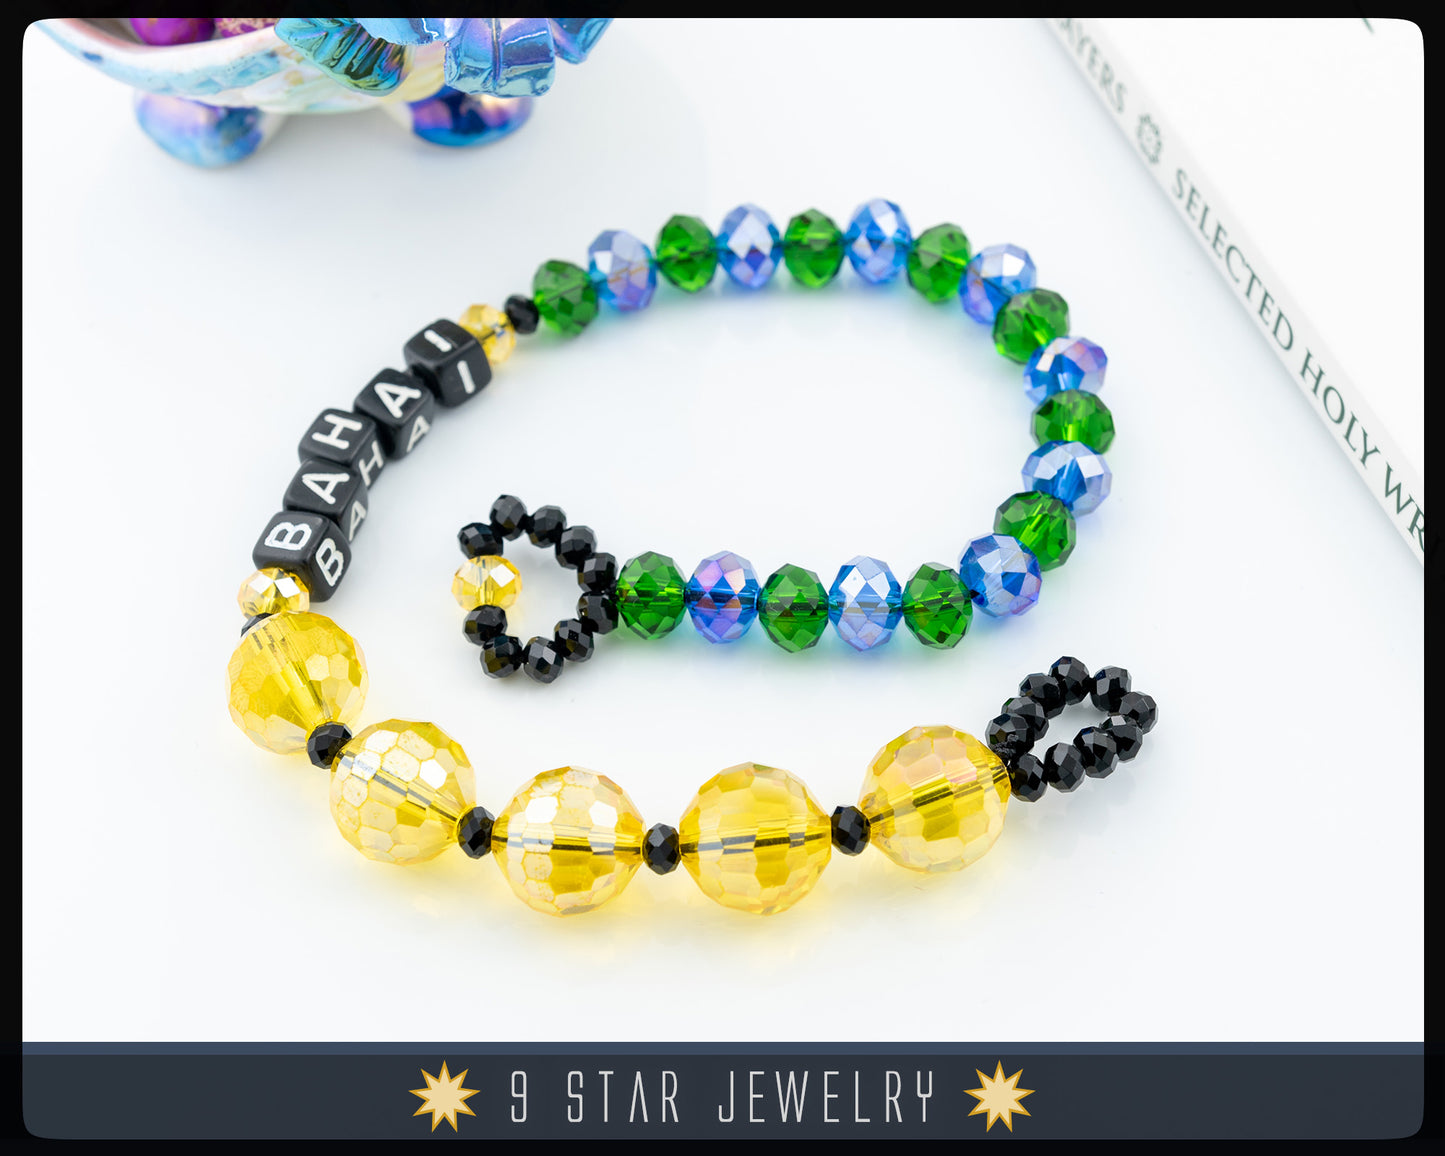 Yellow Blue and Green glass Beads with Letters "Baha'i" Prayer Beads "Glory"